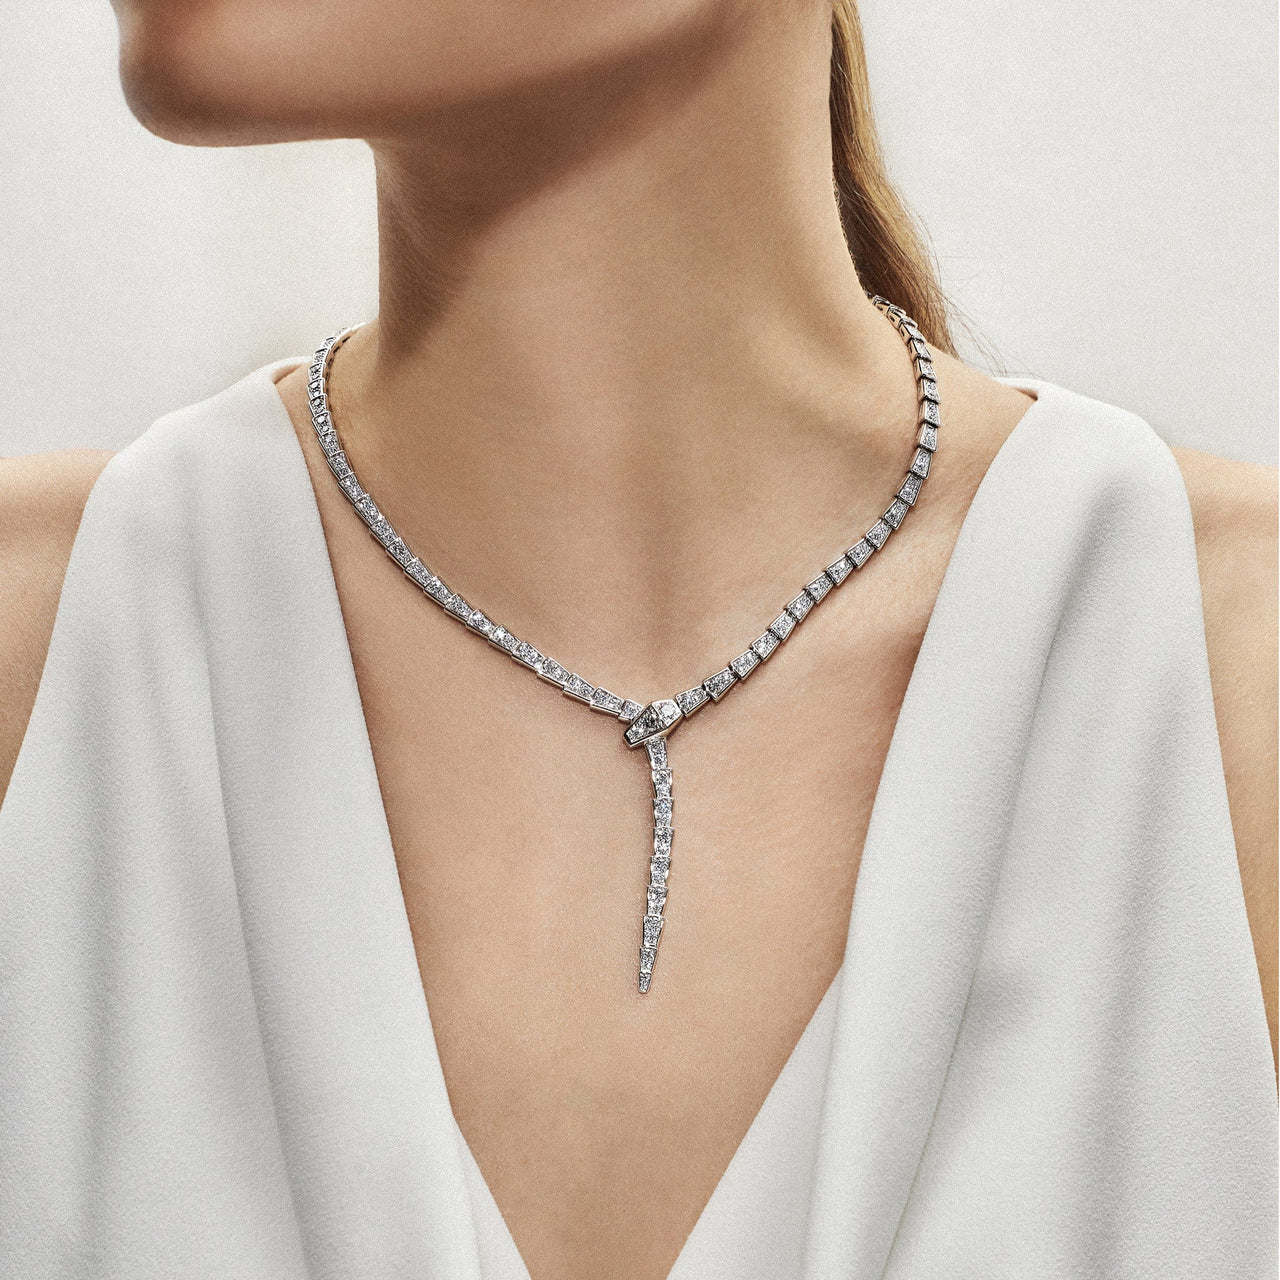 750 Rhodium-Plated White Gold Necklace with Diamonds 0,64 ct - fineness 18  K - Ref No 103.684 / Apart